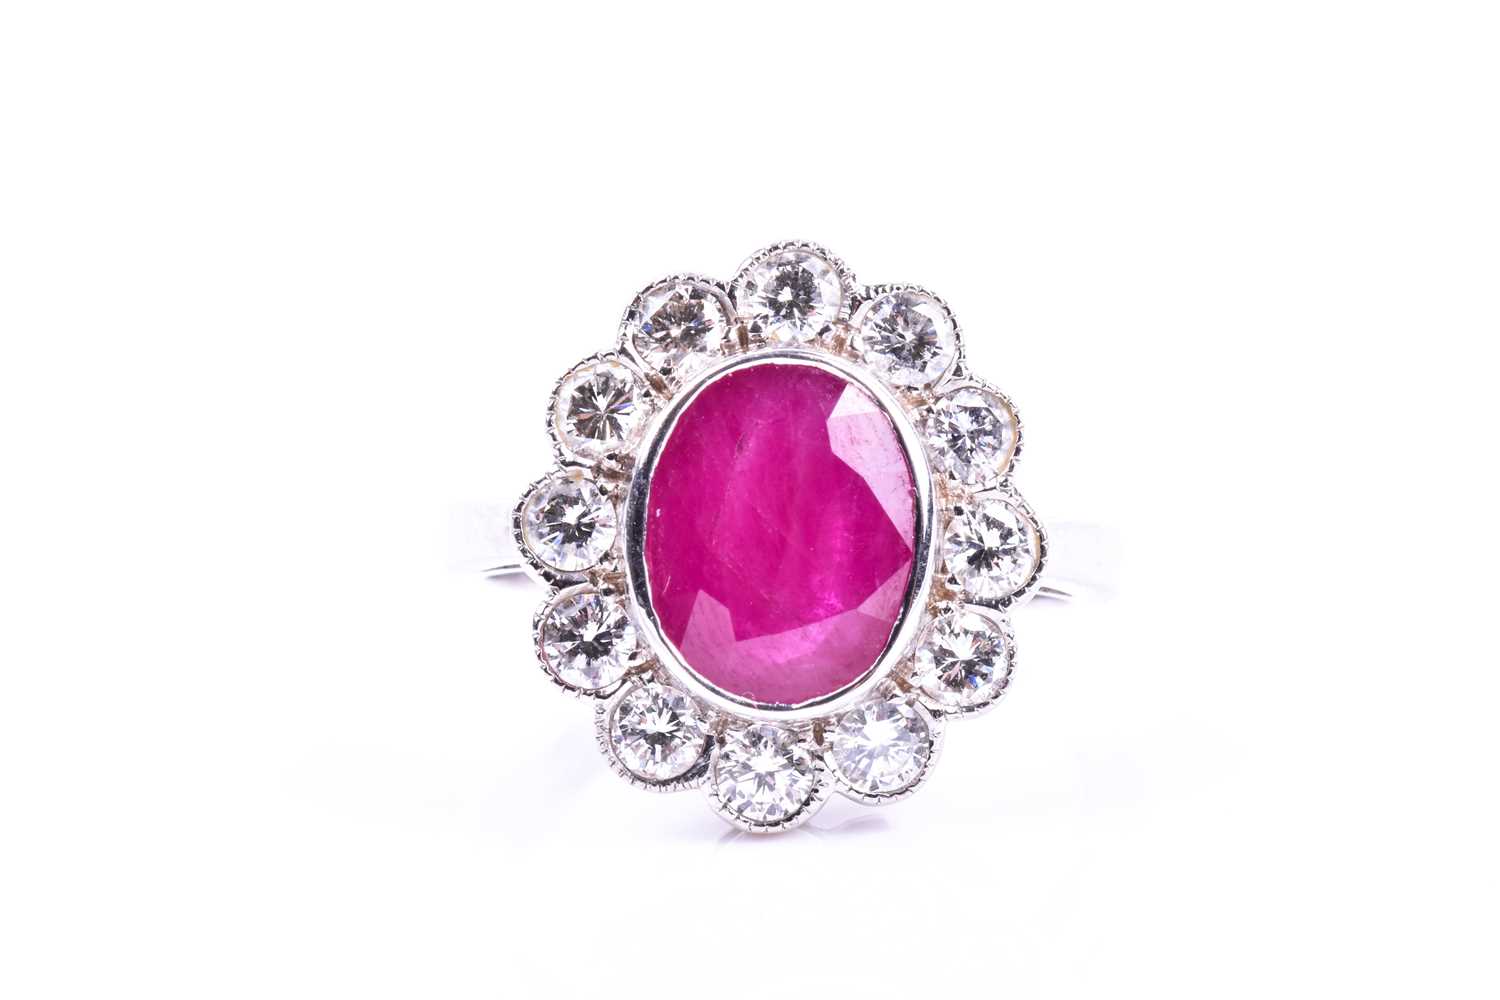 An 18ct white gold, diamond, and ruby cluster ring, set with a mixed oval-cut ruby of